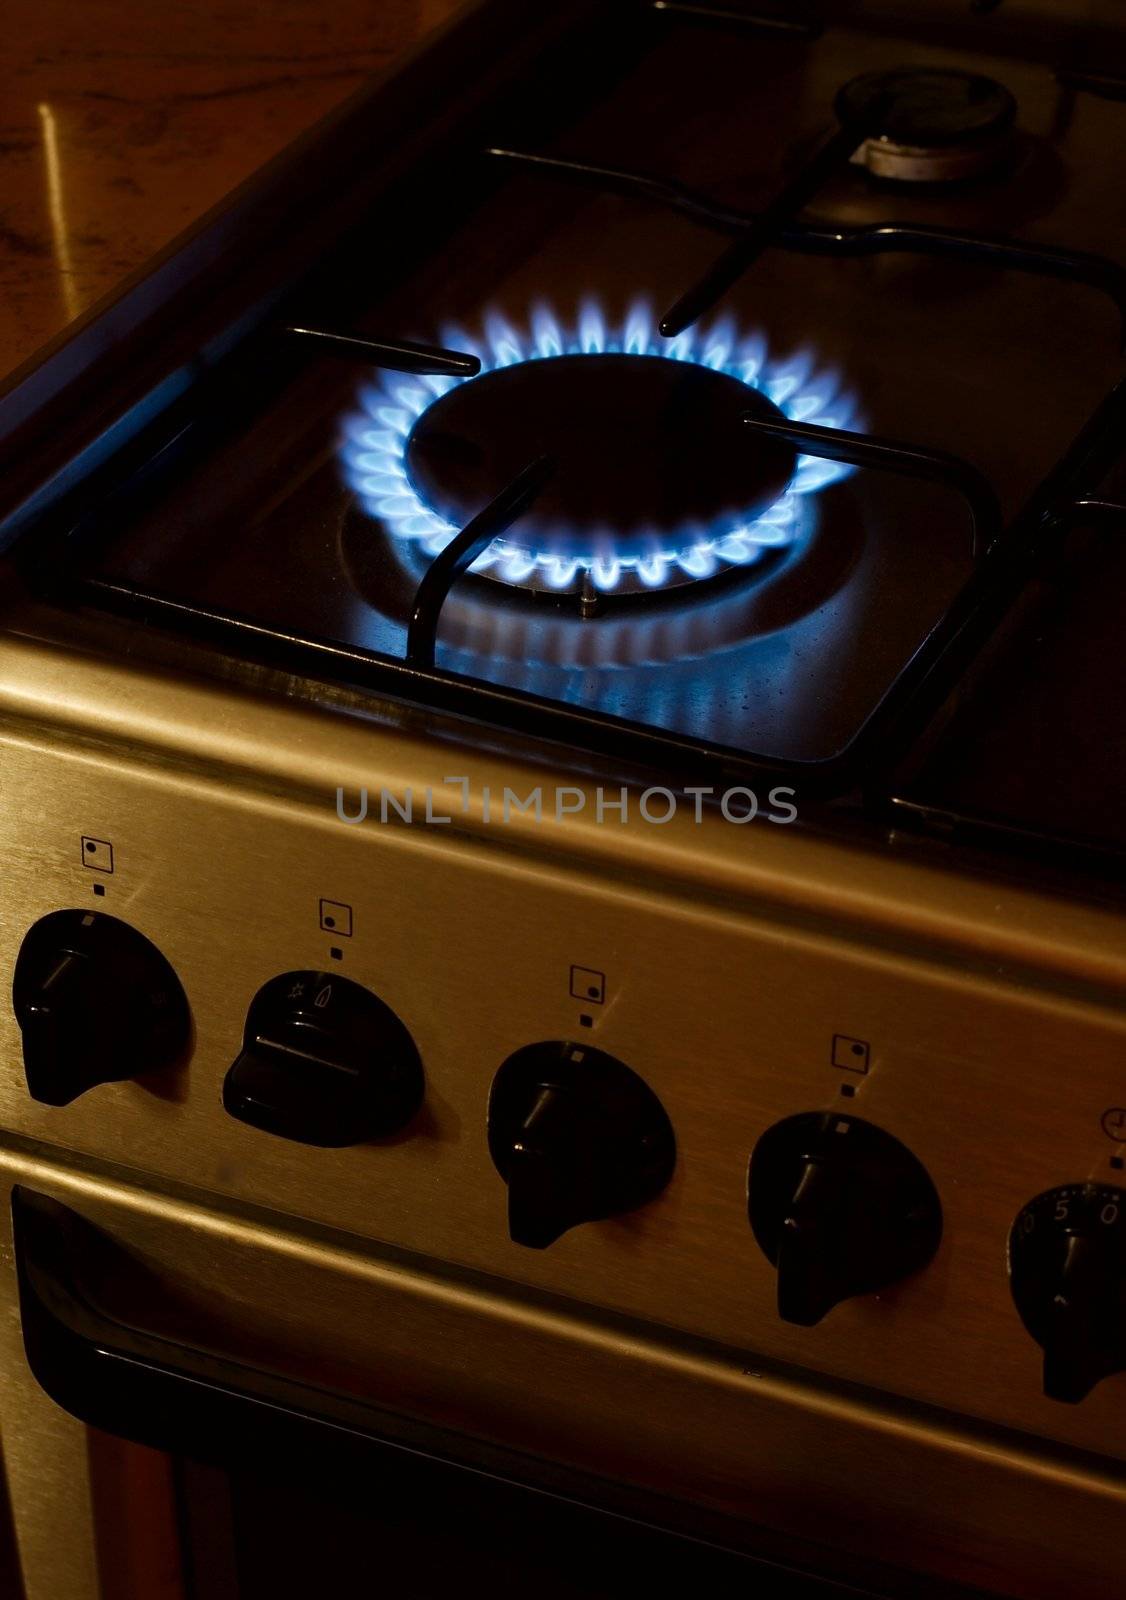 Gas burner of a stove glowing in the evening